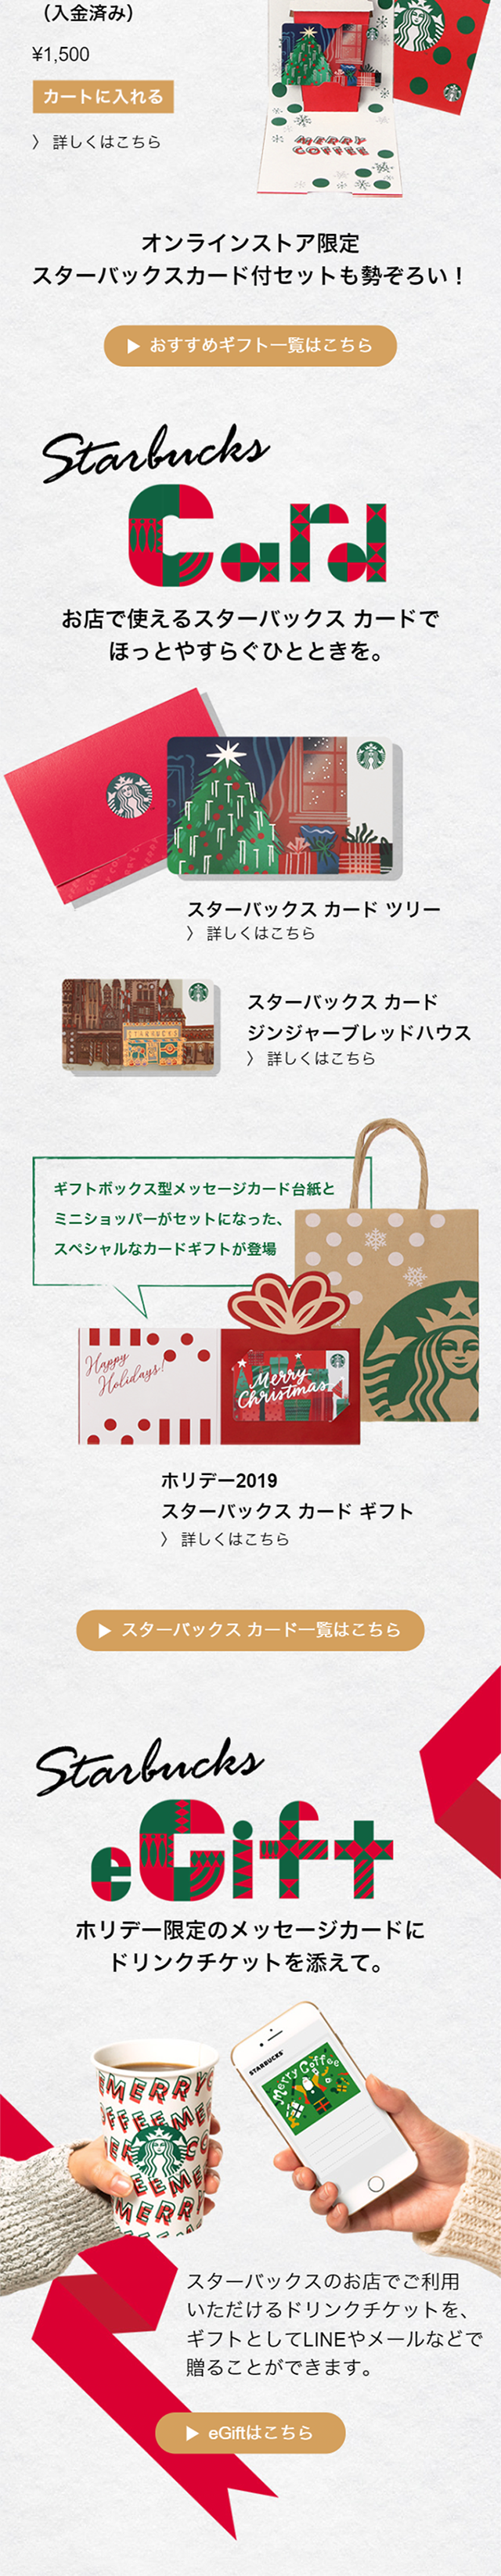 Holiday Gift of Moments 2019_sp_2